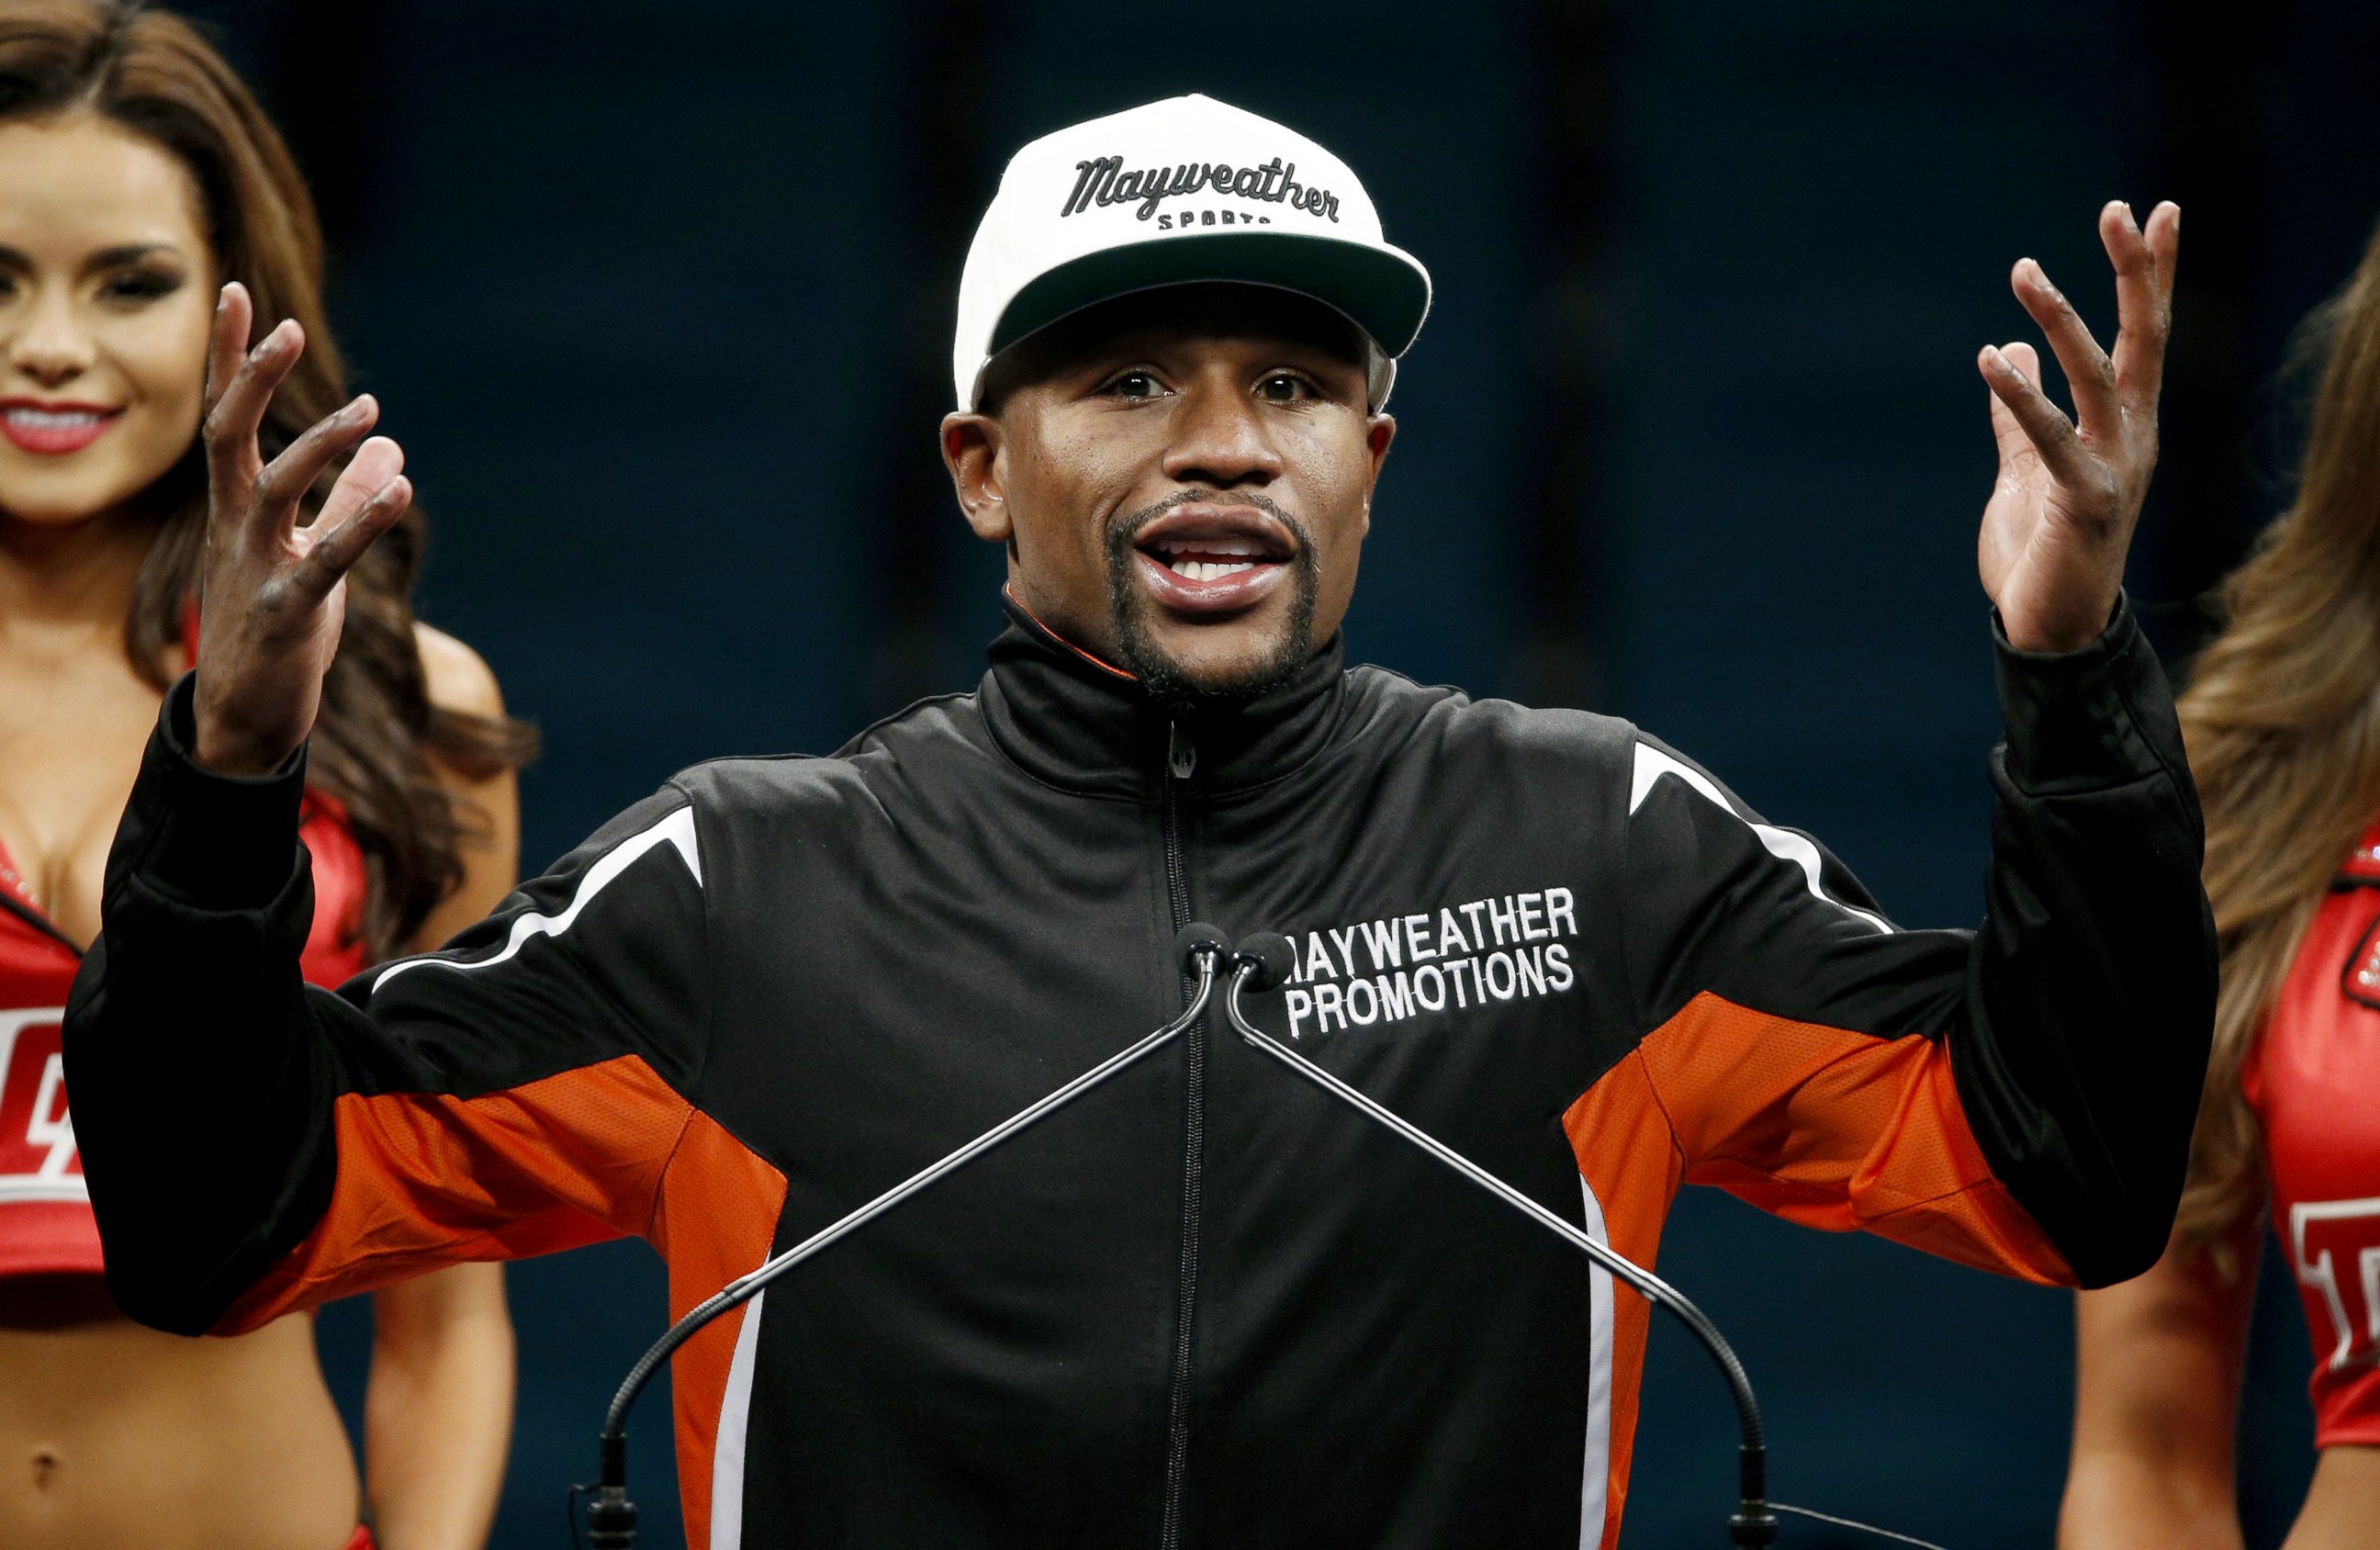 PHOTO: Floyd Mayweather Jr. gestures during a press conference following his welterweight title fight, May 2, 2015 in Las Vegas.